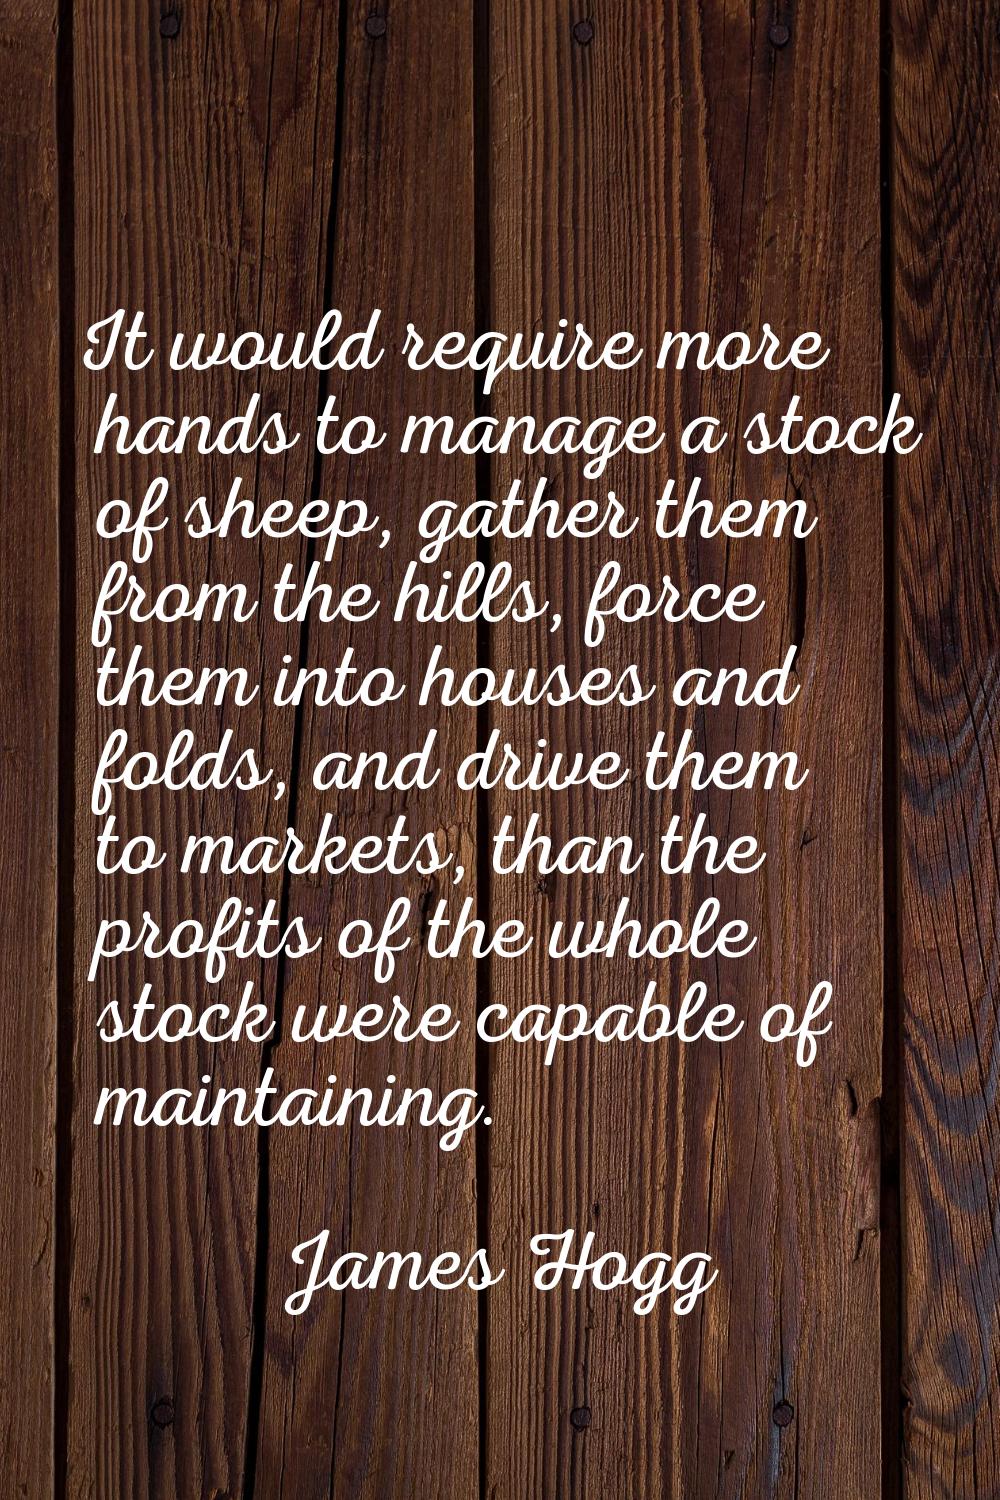 It would require more hands to manage a stock of sheep, gather them from the hills, force them into